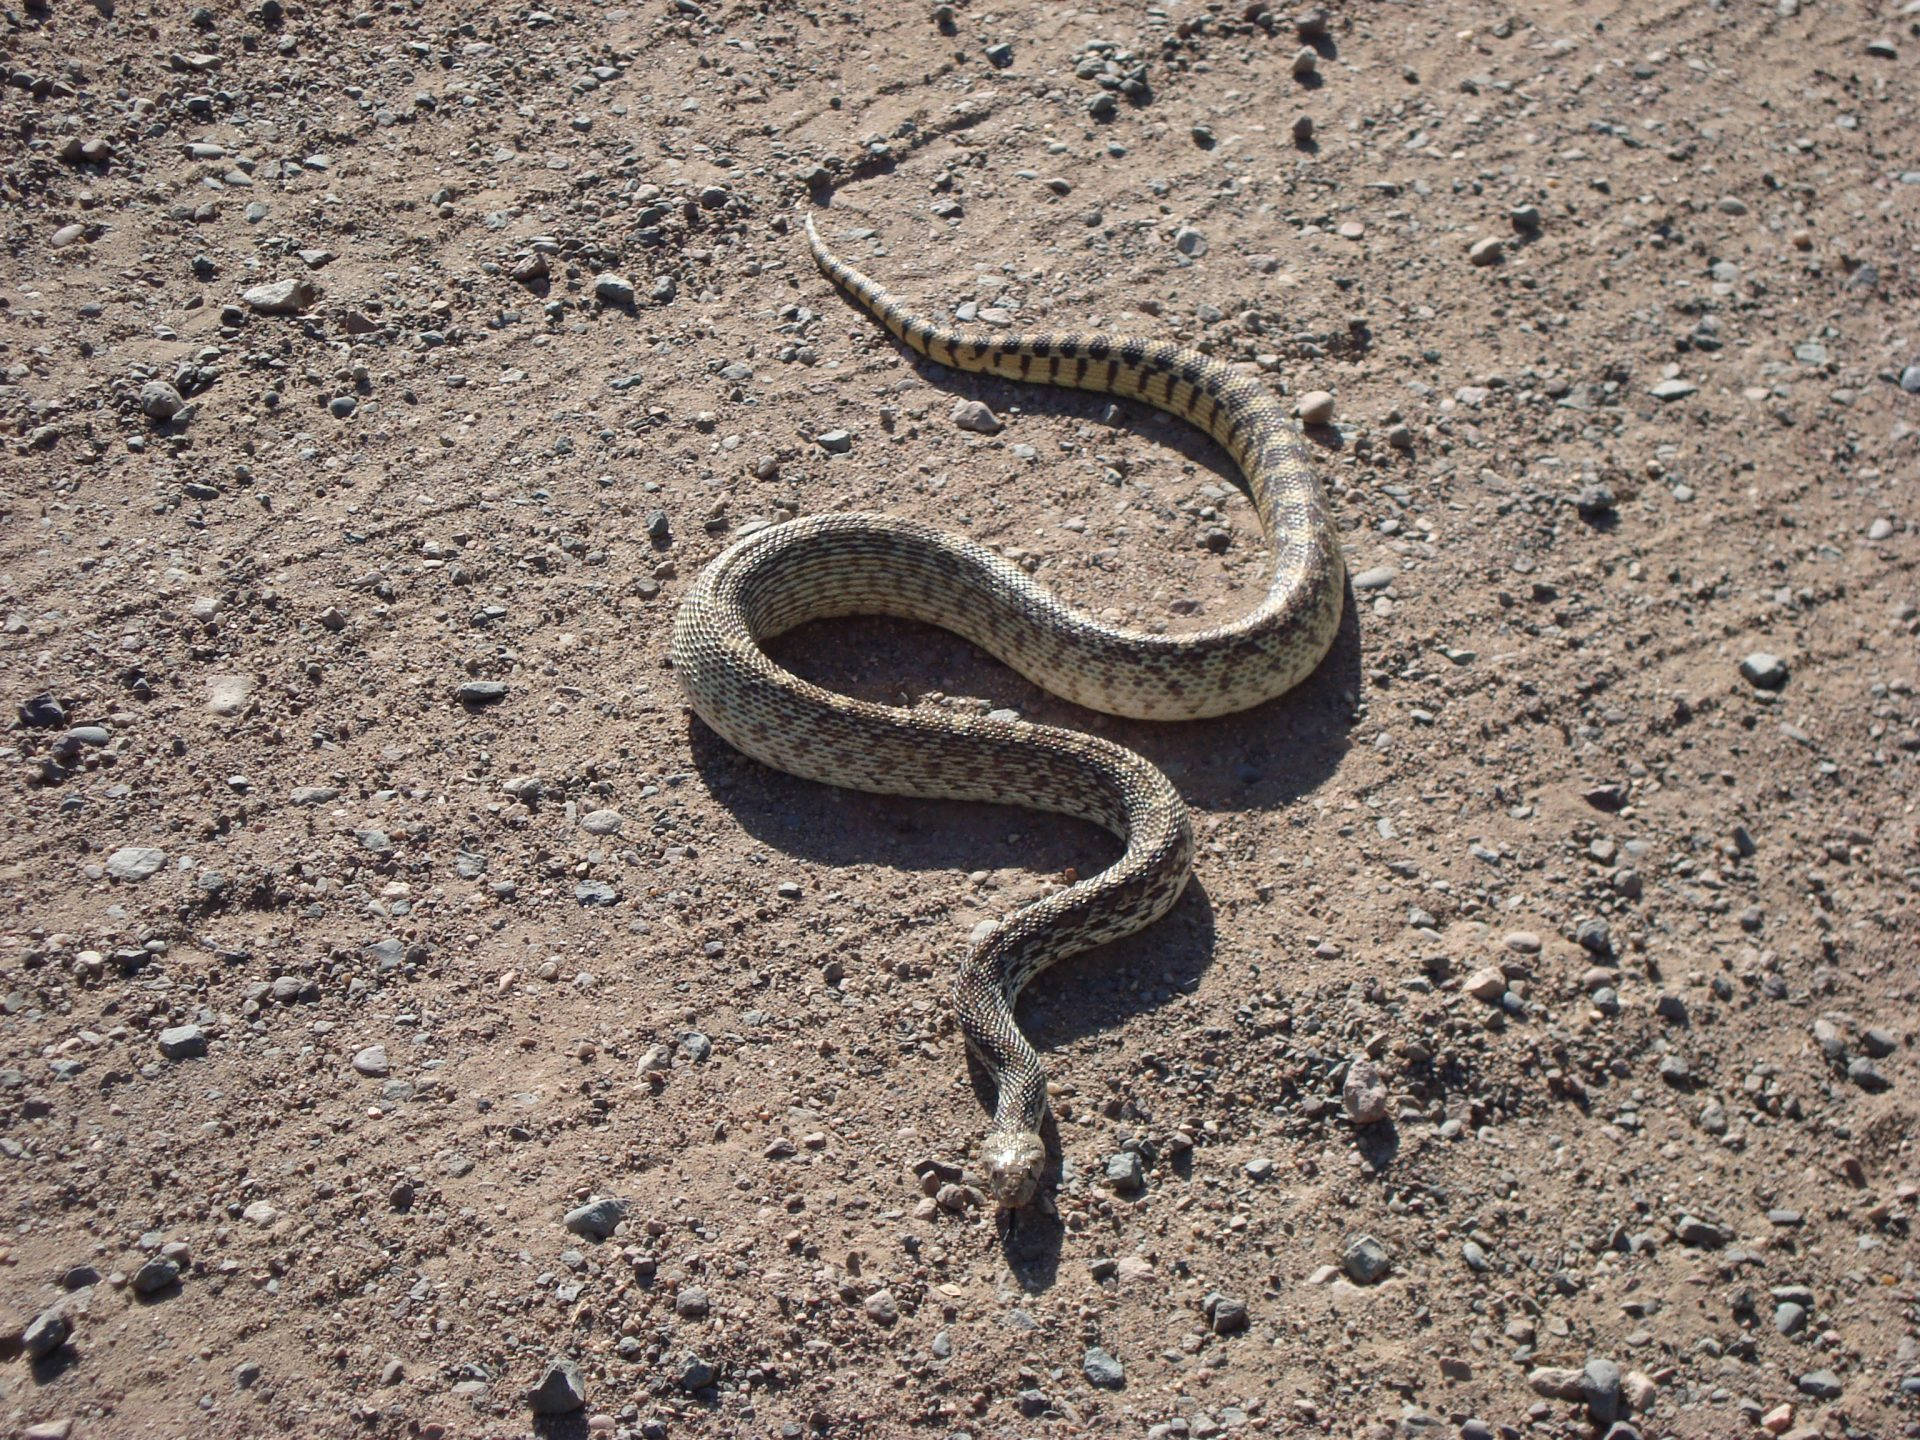 Gopher Snake With S-shaped Body Wallpaper